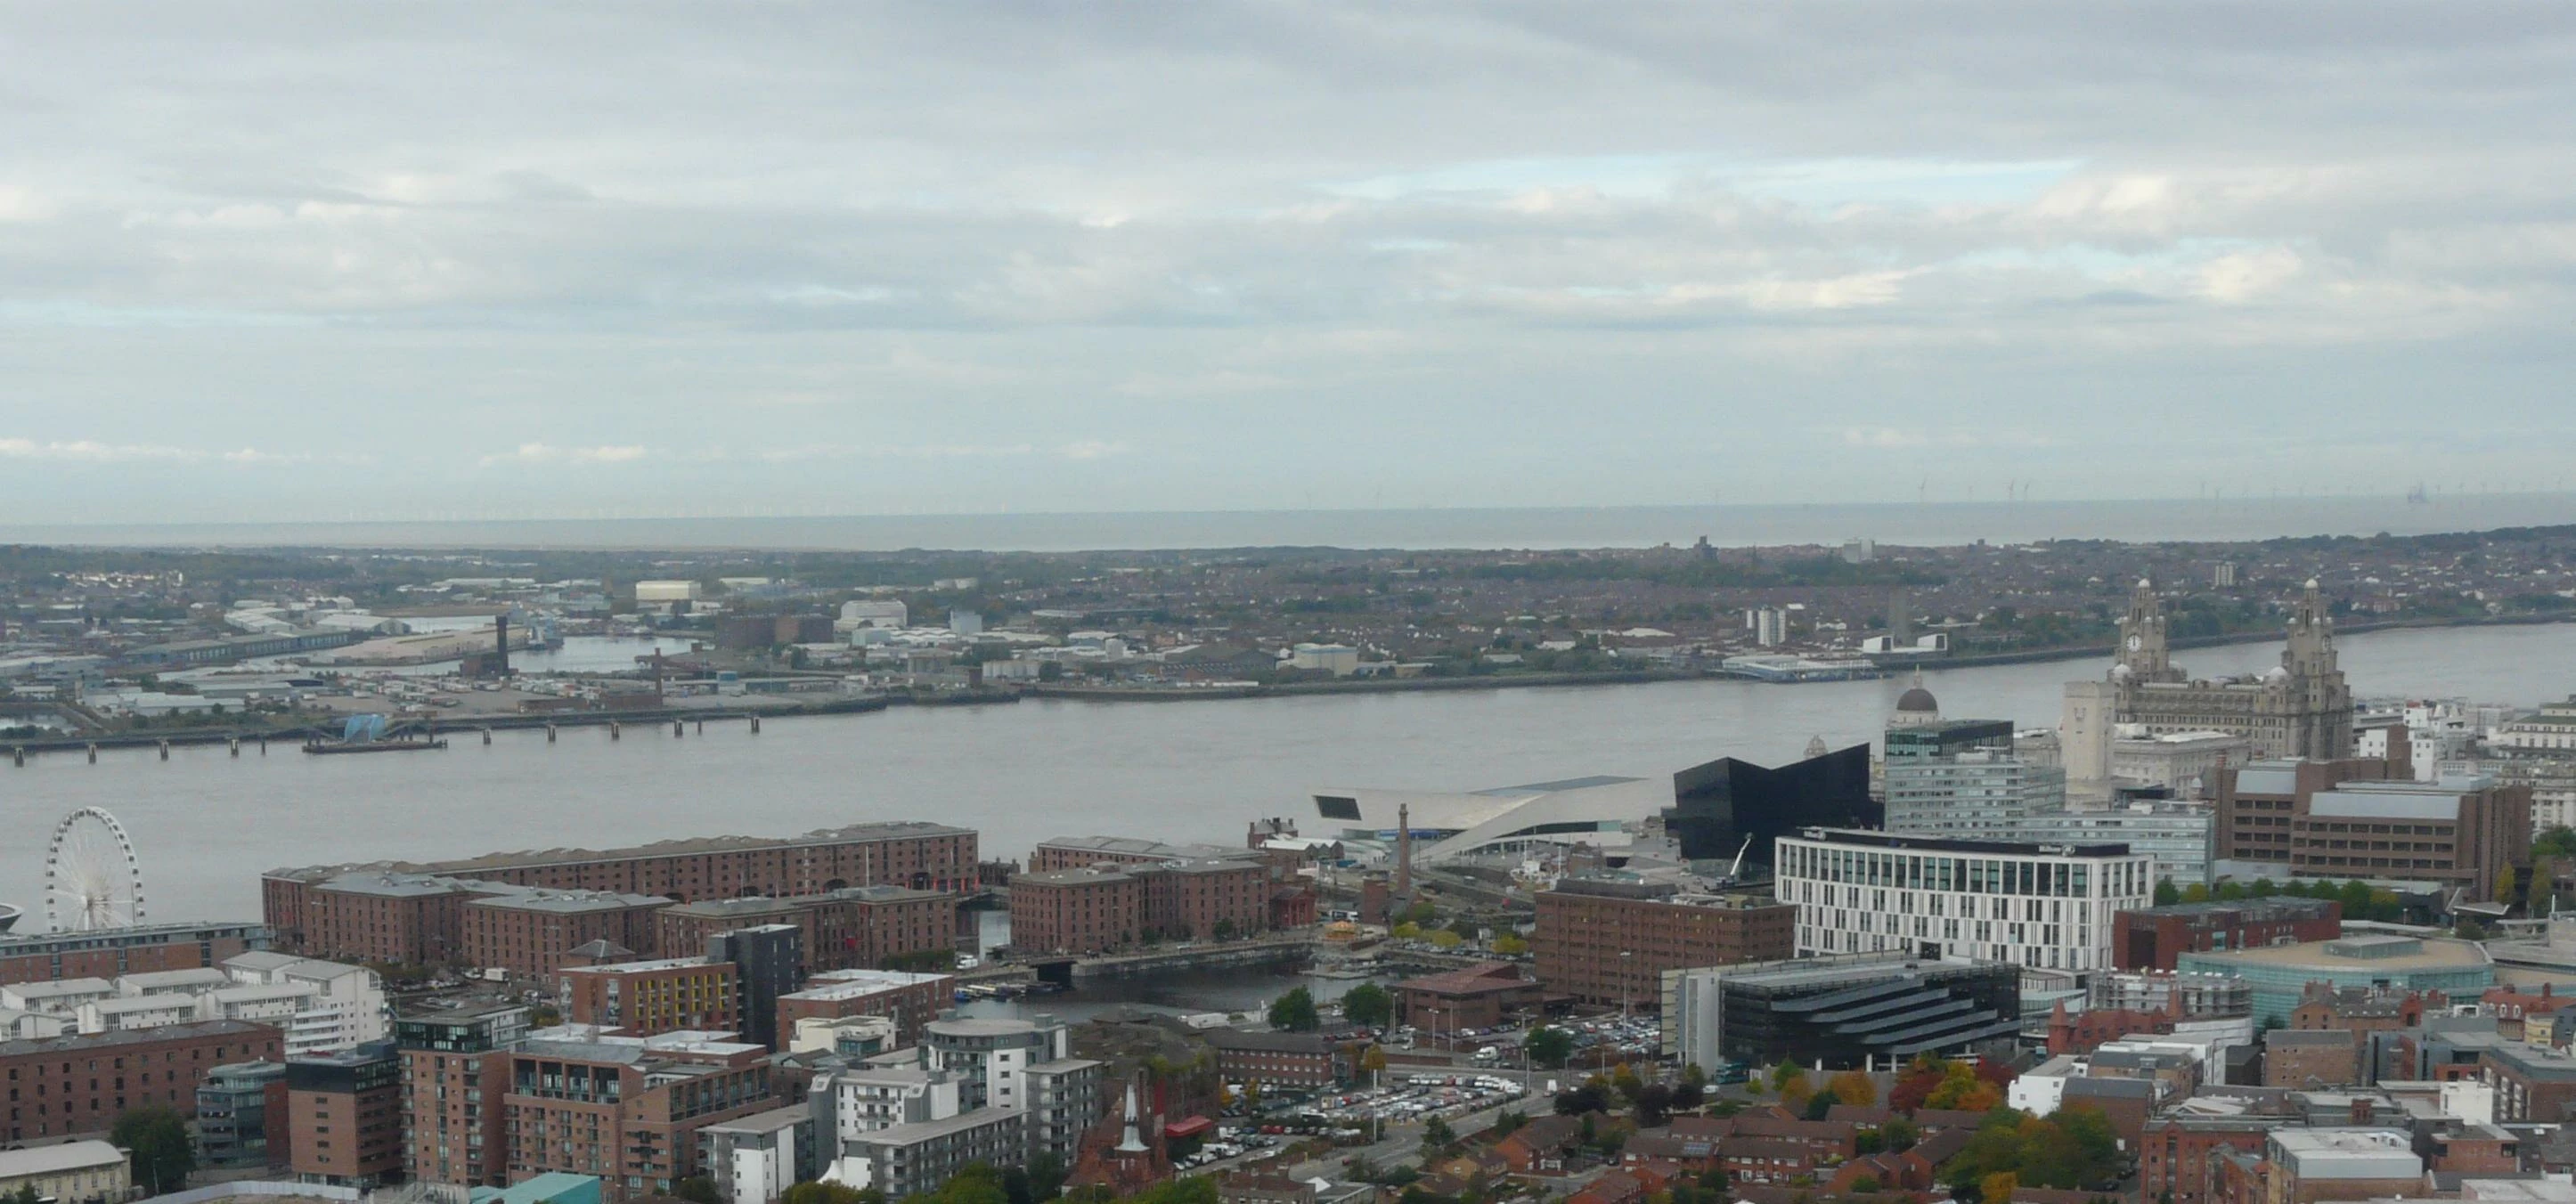 North-West From the Roof, Liverpool Cathedral